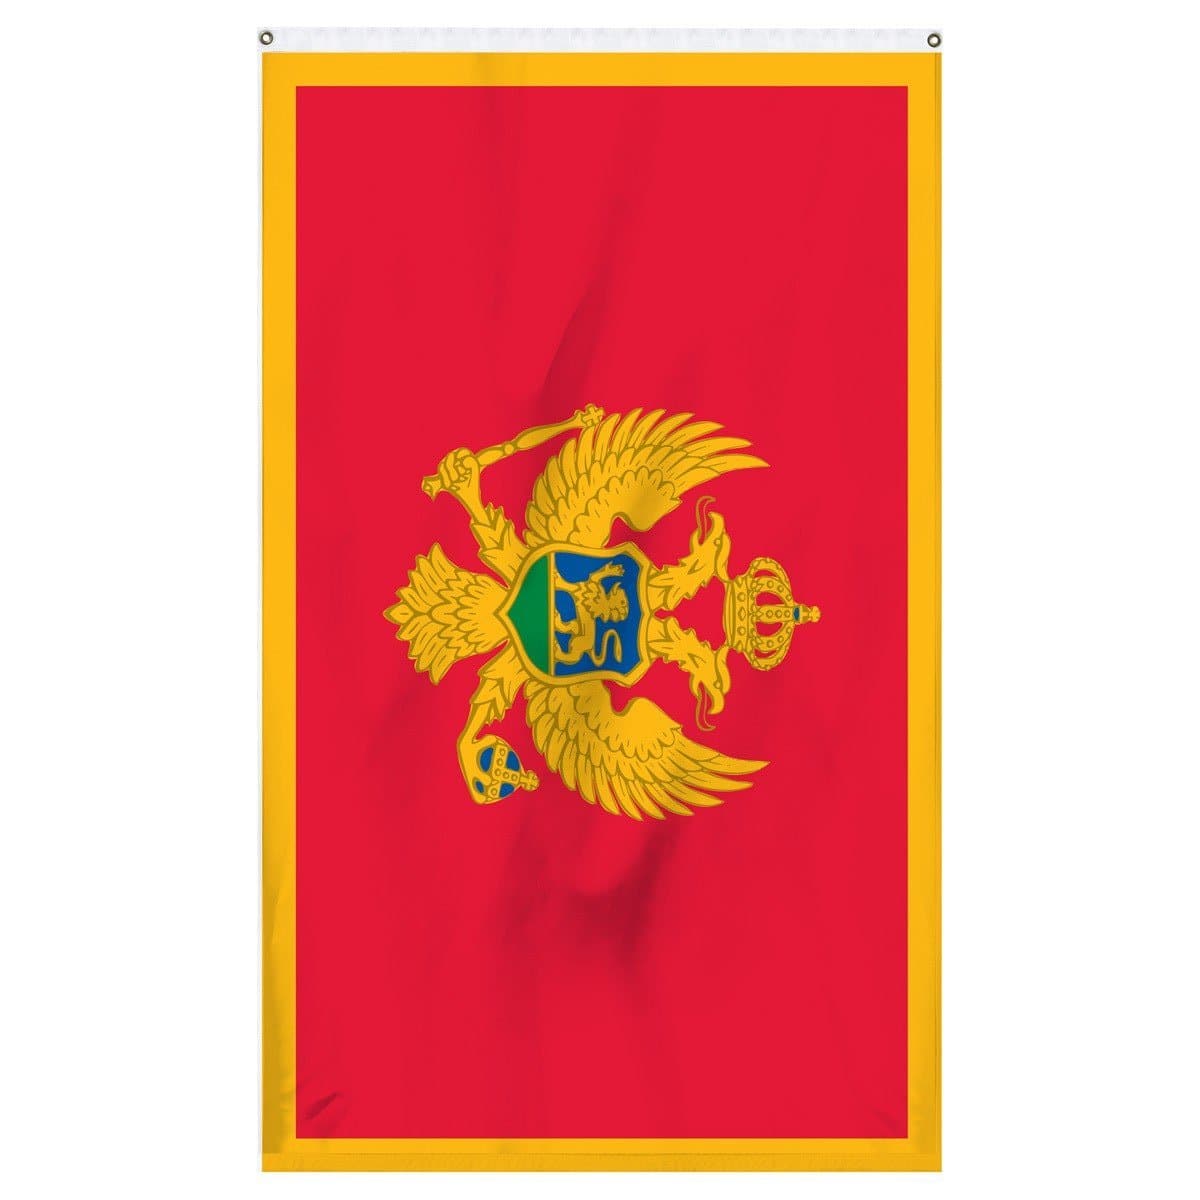 Montenegro National flag for sale to buy online now from Atlantic Flagpole